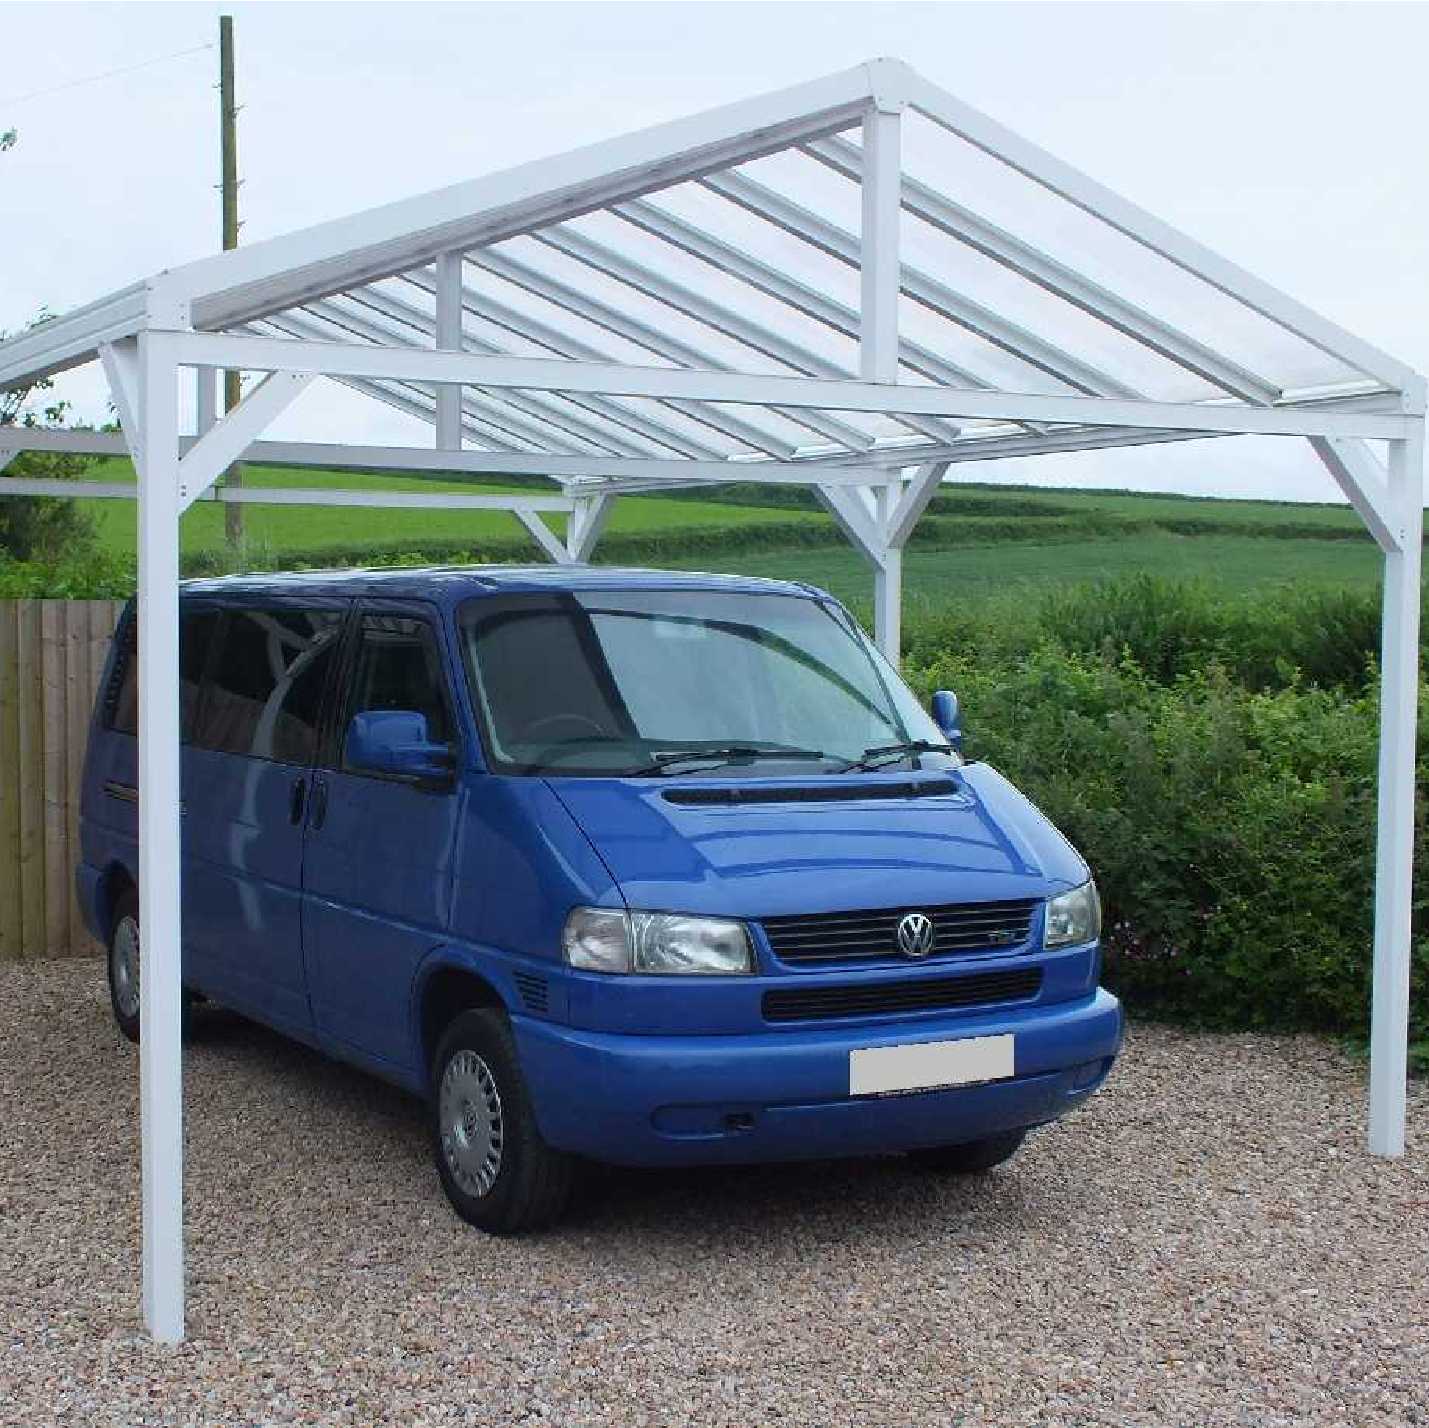 Omega Smart Free-Standing, White Gable-Roof (type 1) Canopy with 16mm Polycarbonate Glazing - 7.4m (W) x 4.0m (P), (8) Supporting Posts